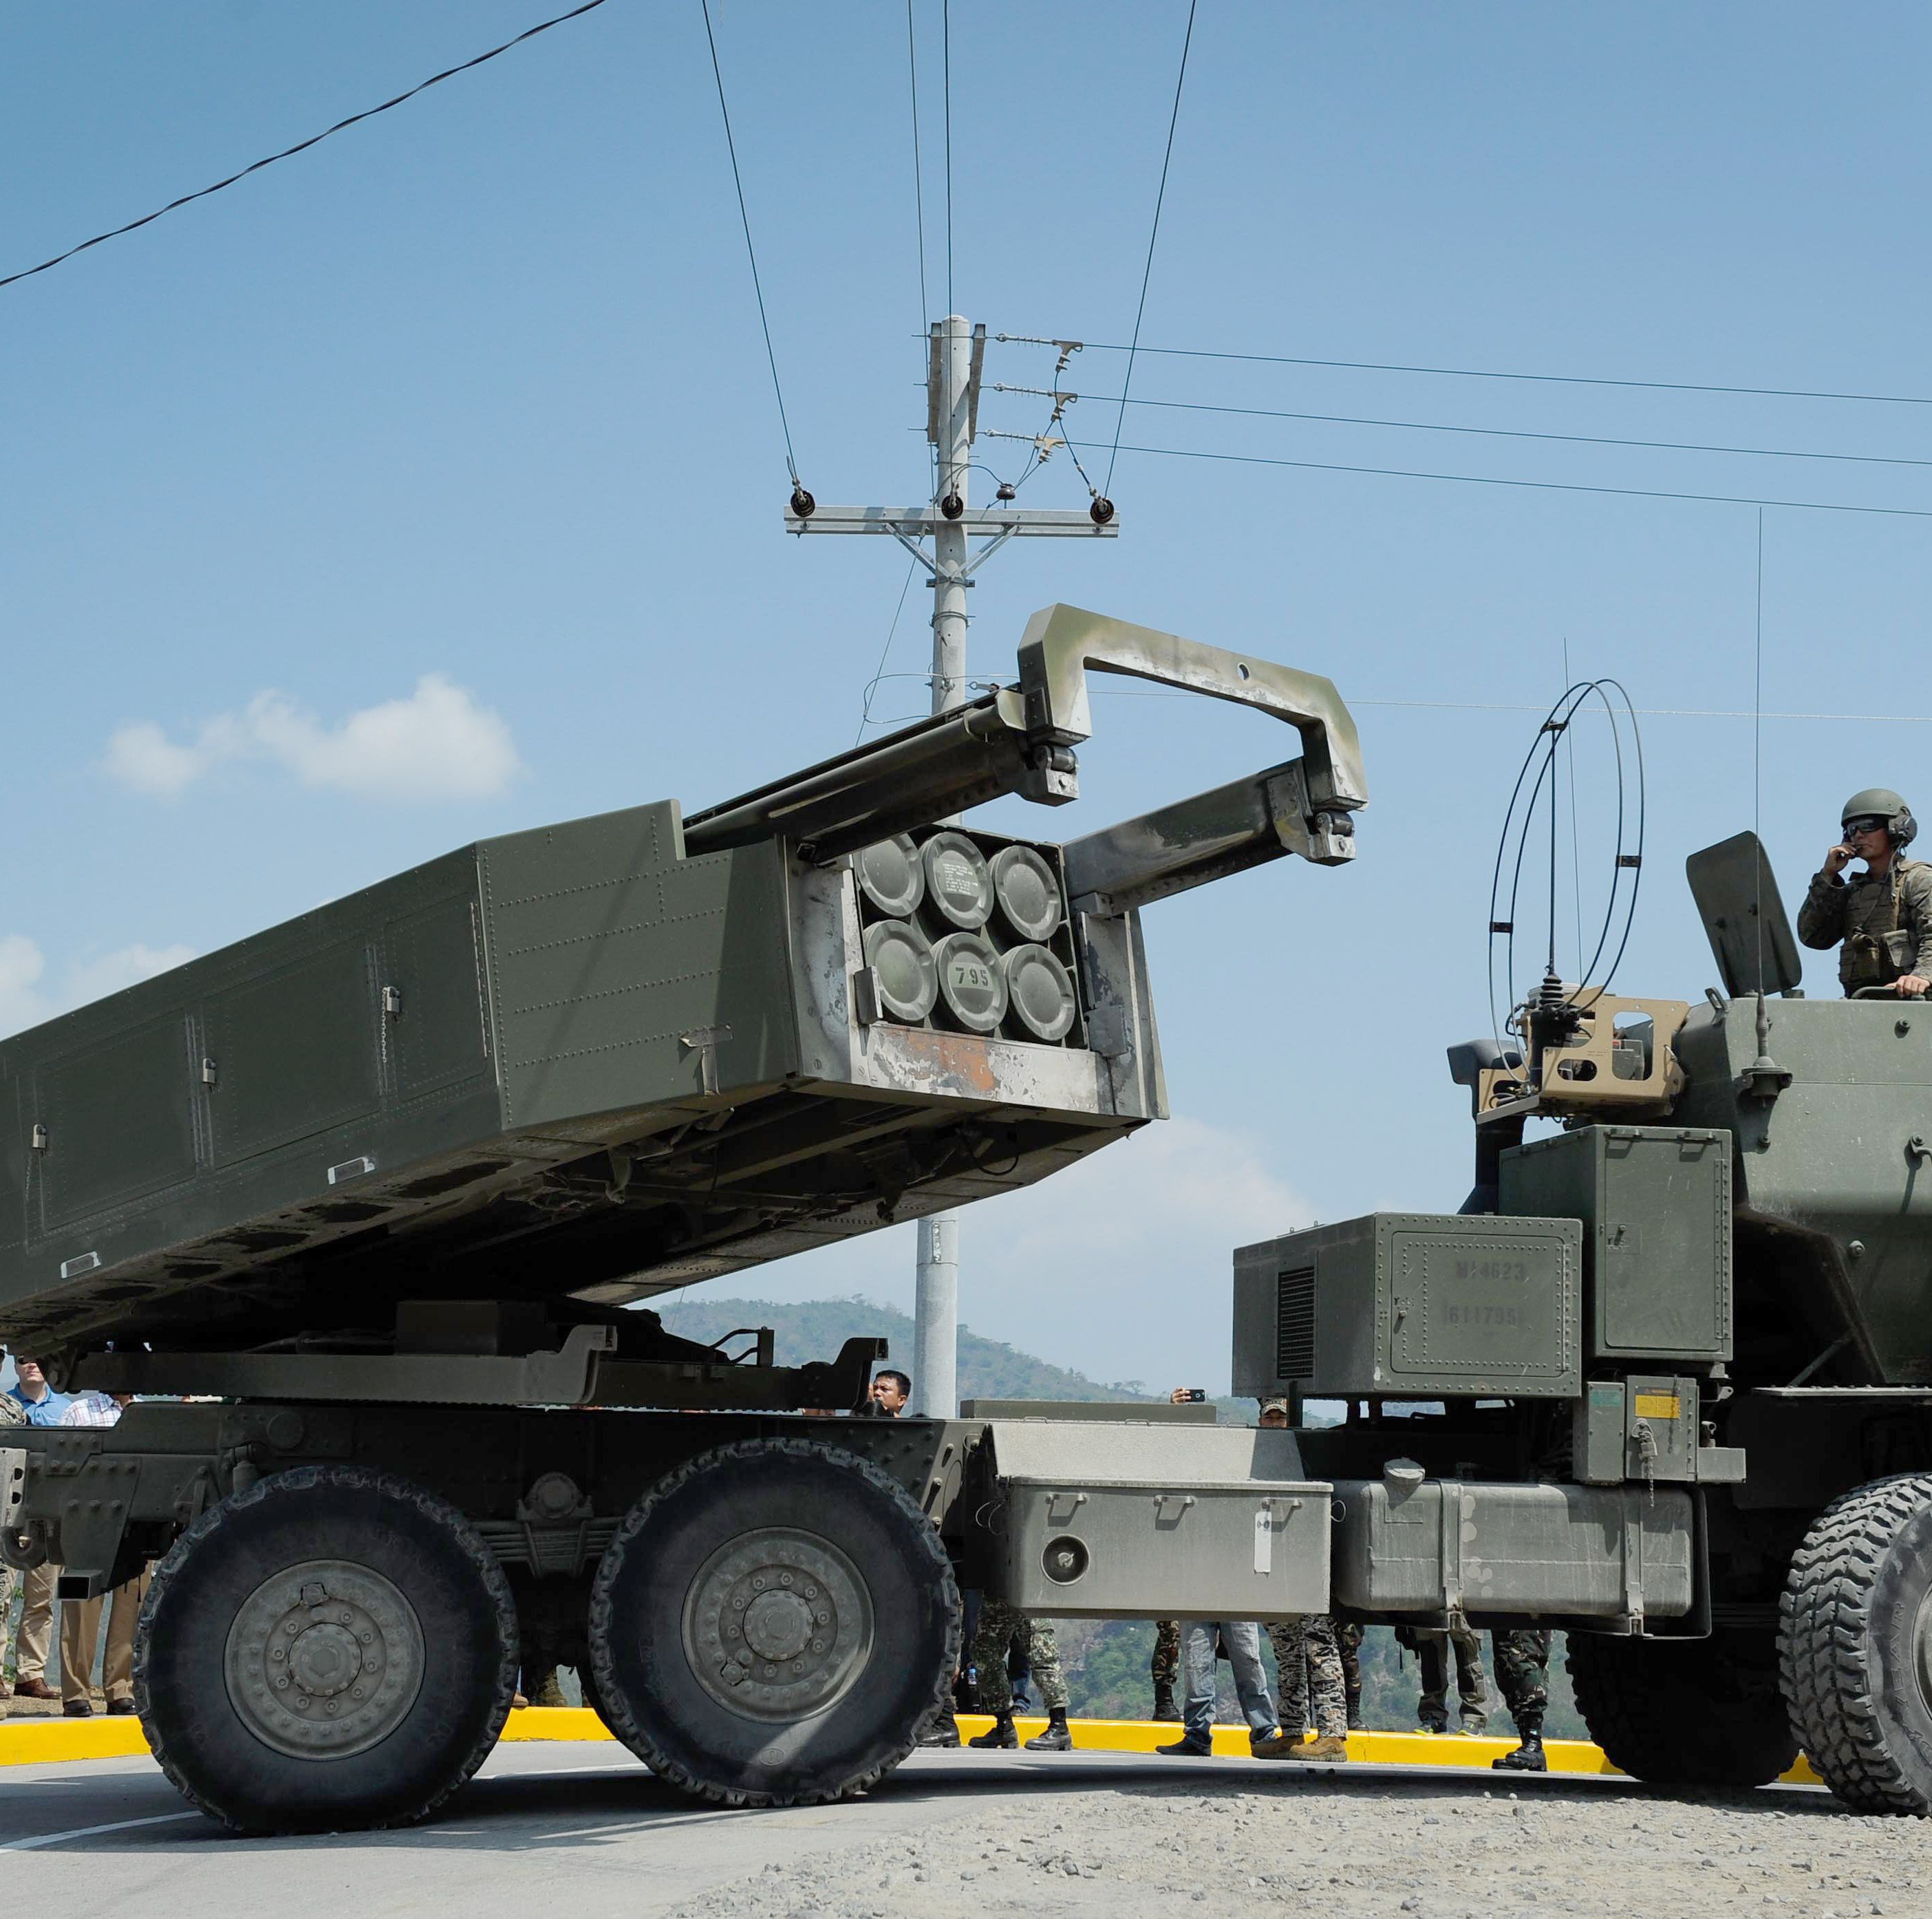 Russia Claims It 'Hacked' HIMARS Rocket Launchers. That's Probably a Big, Fat Lie